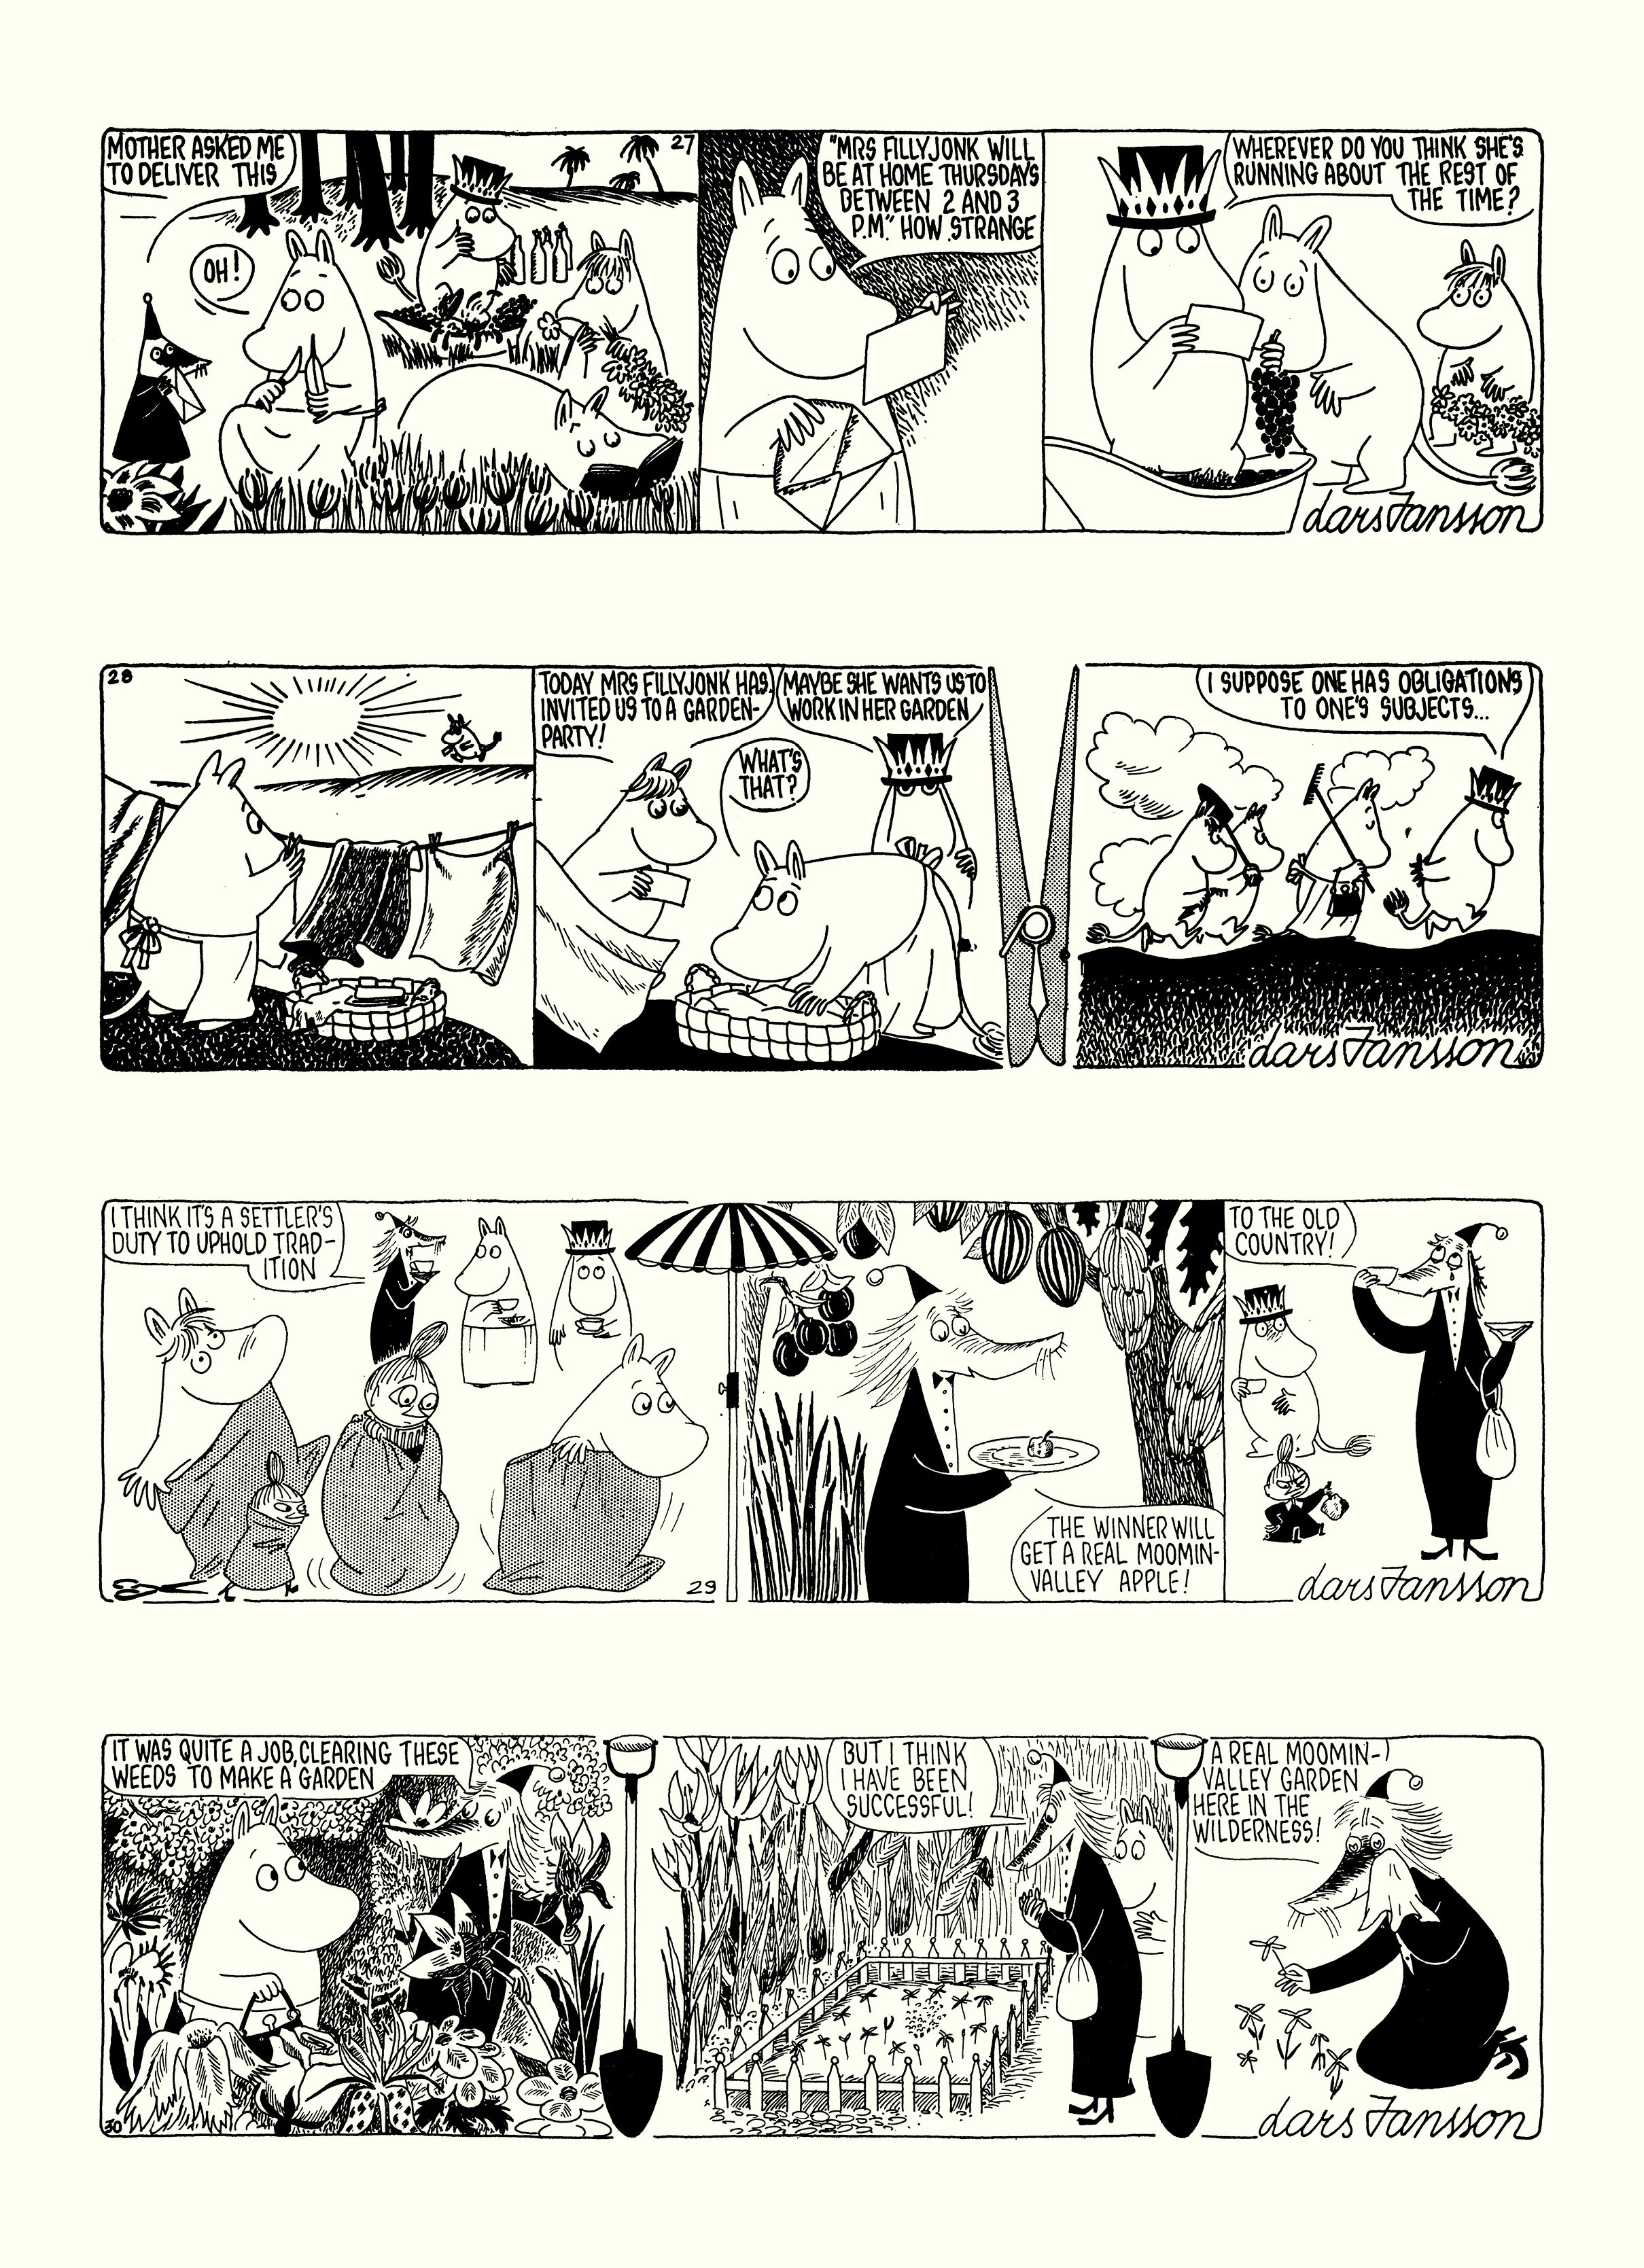 Read online Moomin: The Complete Lars Jansson Comic Strip comic -  Issue # TPB 7 - 13